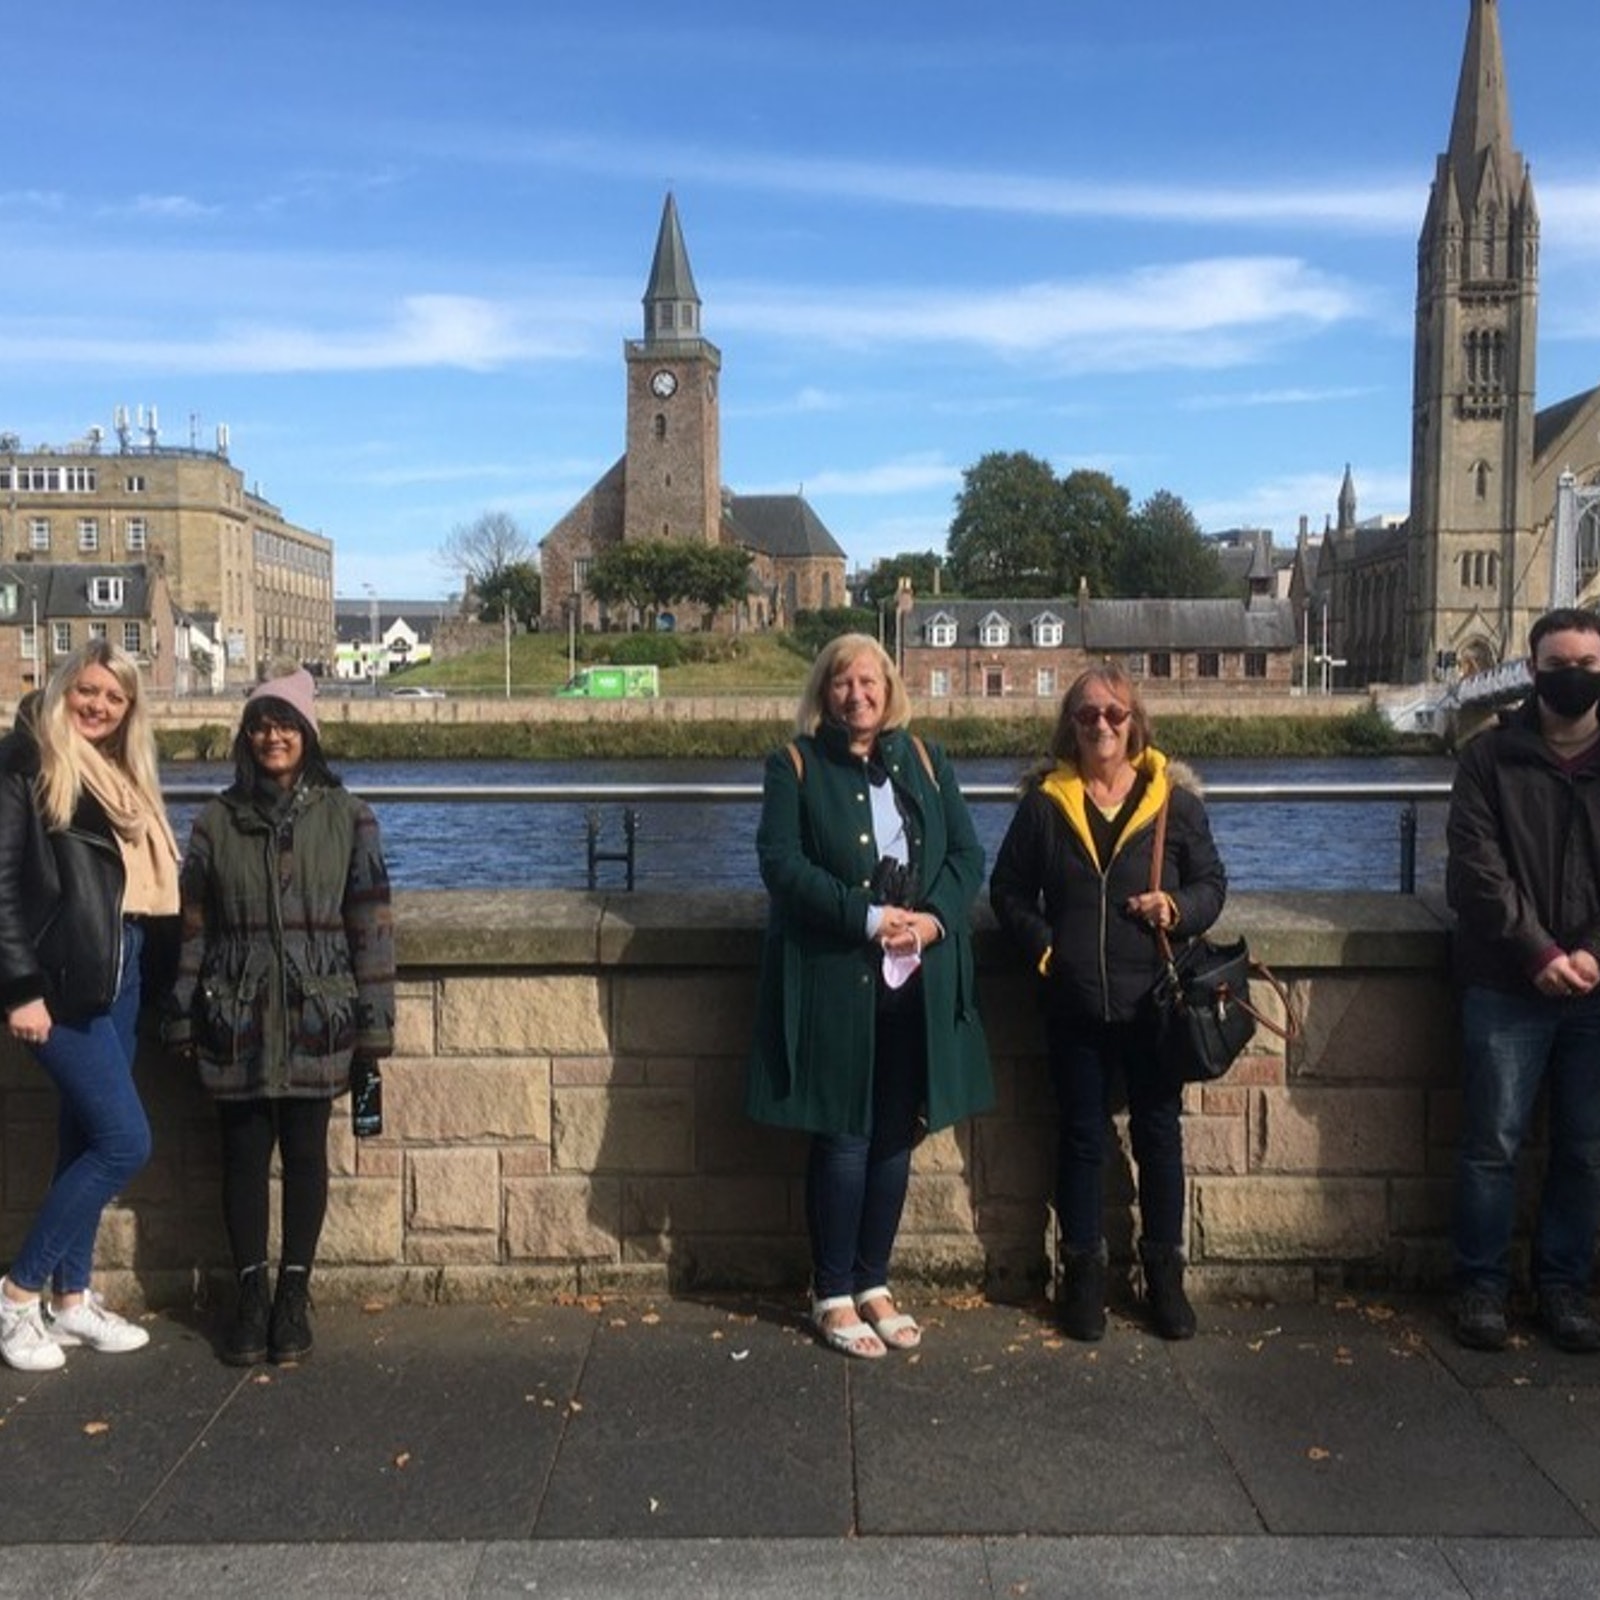 Inverness City Walking Tour in United Kingdom